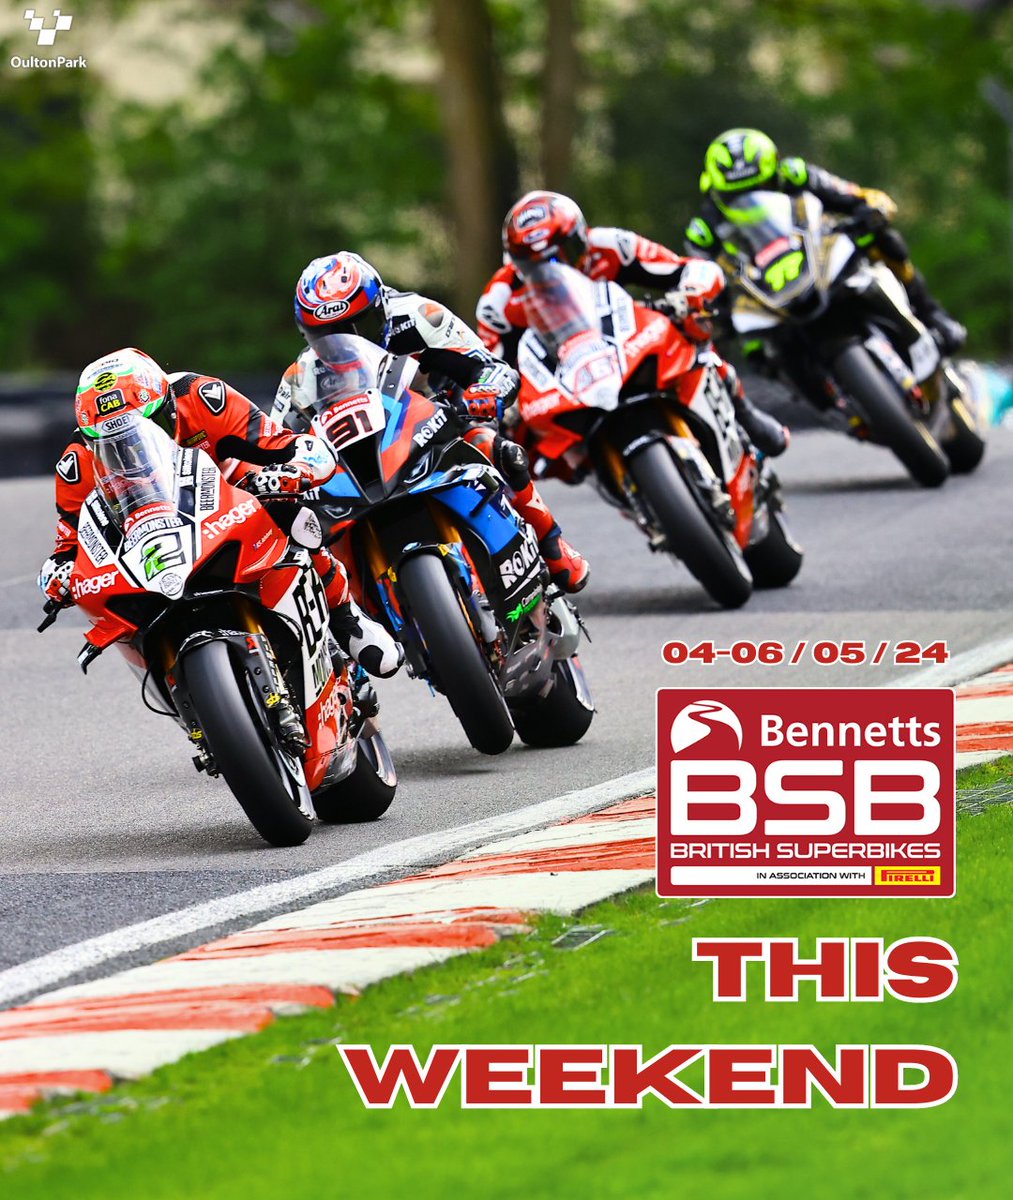 Could a bank holiday get any better than this?? 🤩🤩

@OfficialBSB is back this weekend, Saturday 4 - Monday 6 May 🏍💨

📲 Find out more: oultonpark.co.uk/2024/may/benne…